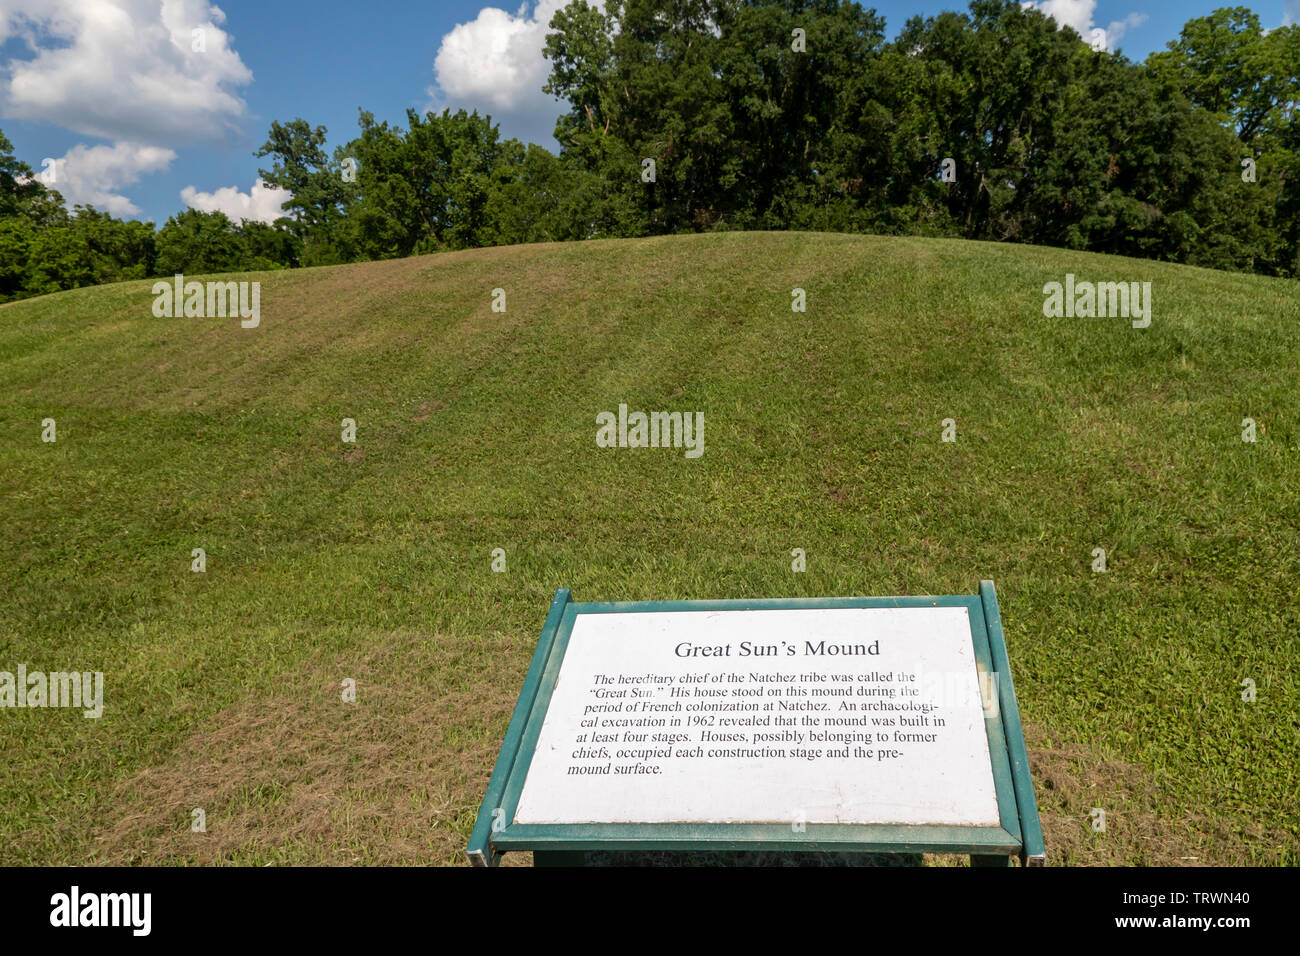 Natchez, Mississippi - Great Sun's Mound at the Grand Village of the Natchez Indians, the main ceremonial area for the Natchez Indians of southwest Mi Stock Photo